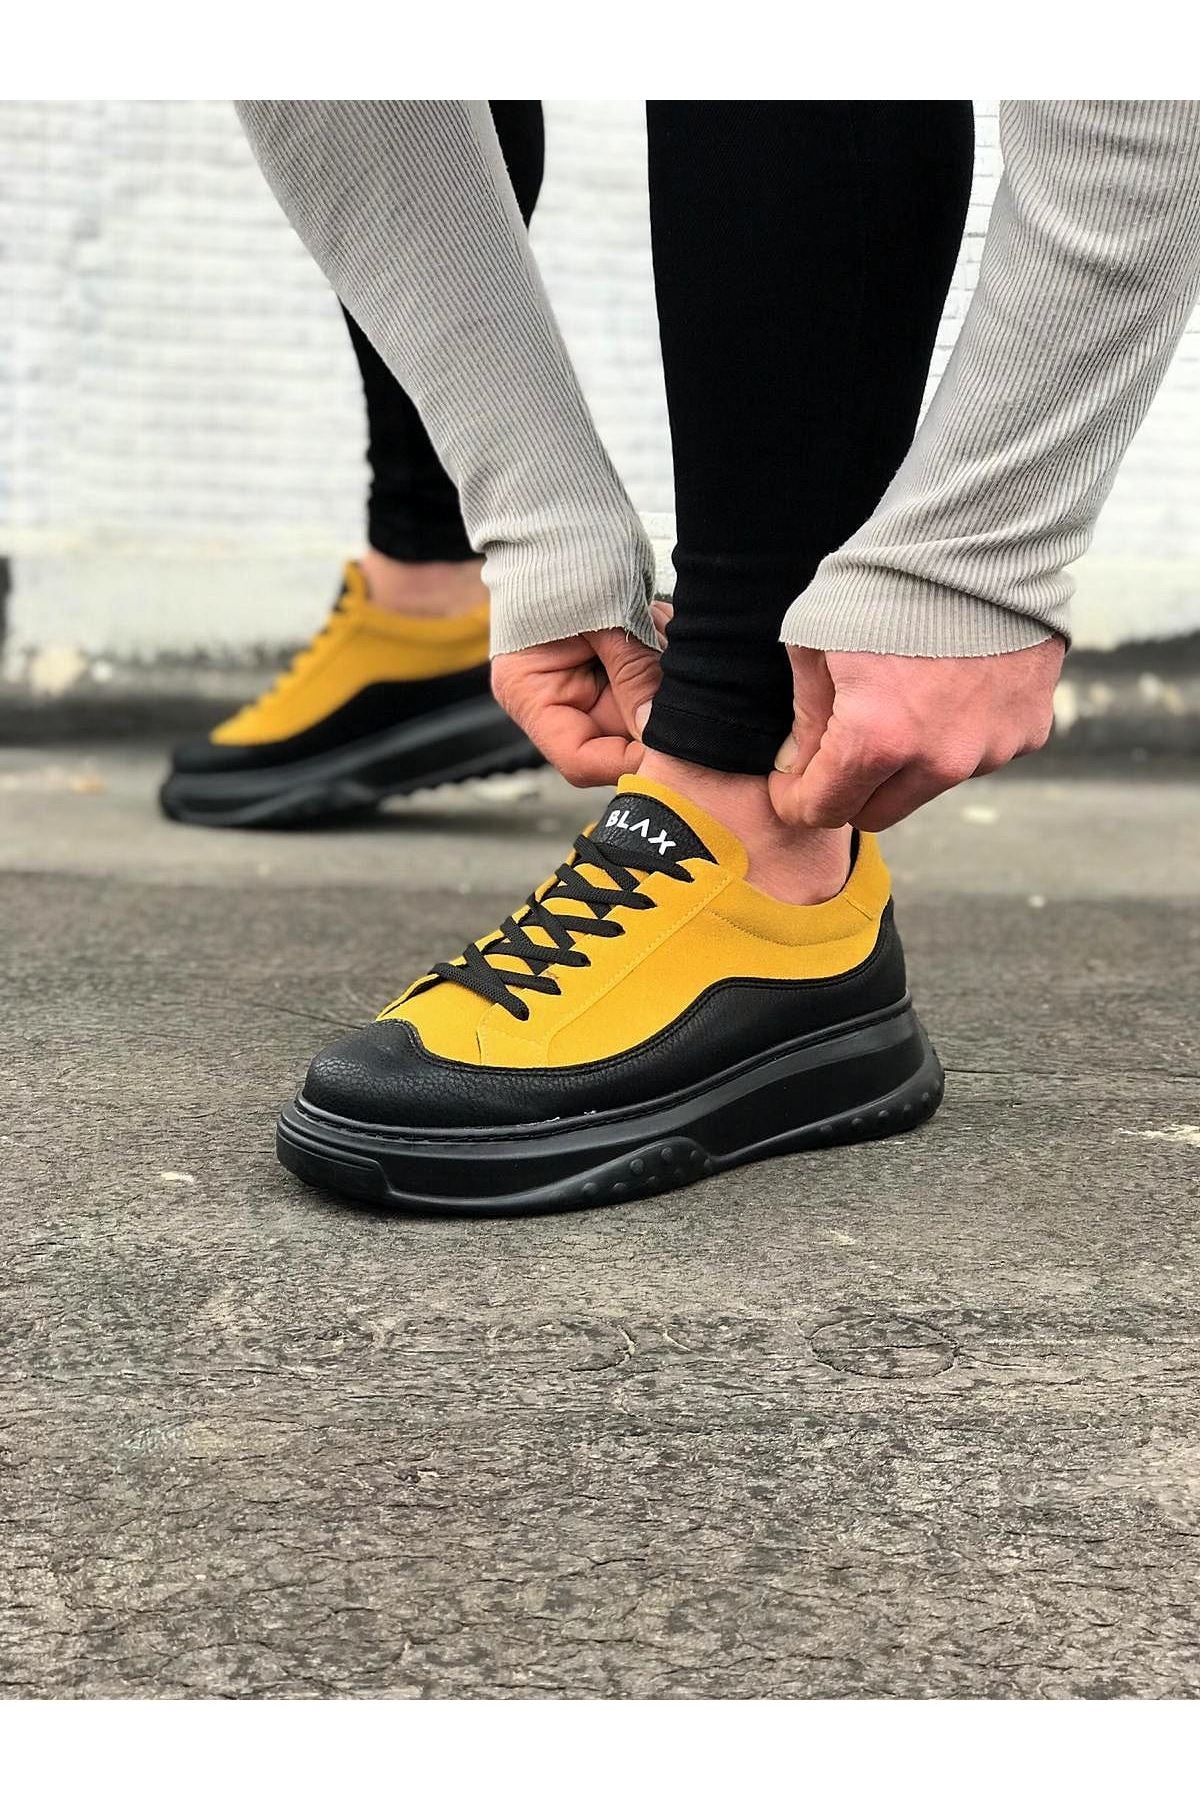 WG507 Charcoal Yellow Men's Shoes - STREETMODE™